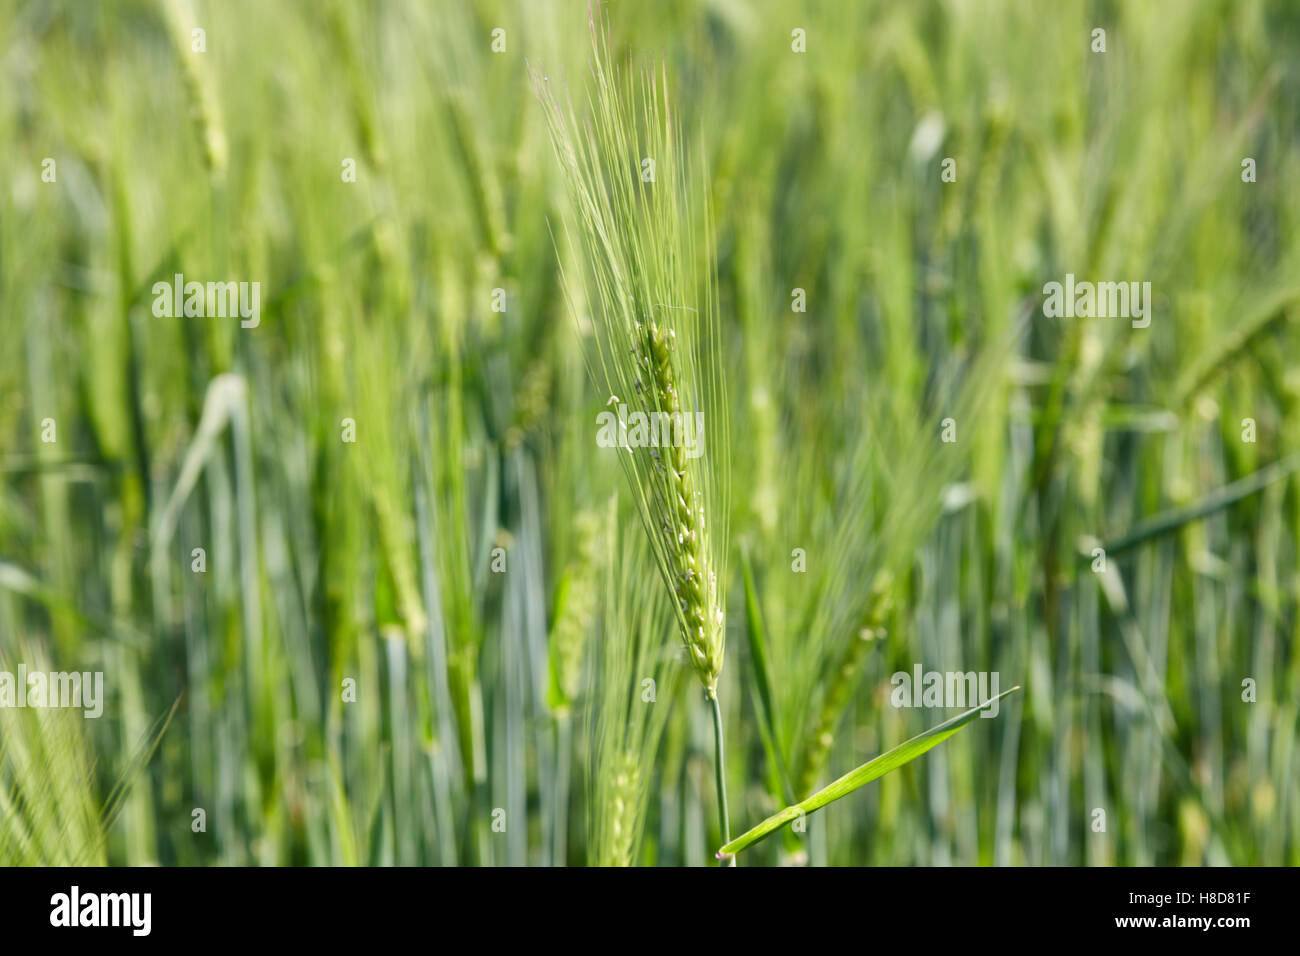 Field of young green barley plants in the spring. One plant stands out sharply against the rest of the field Stock Photo